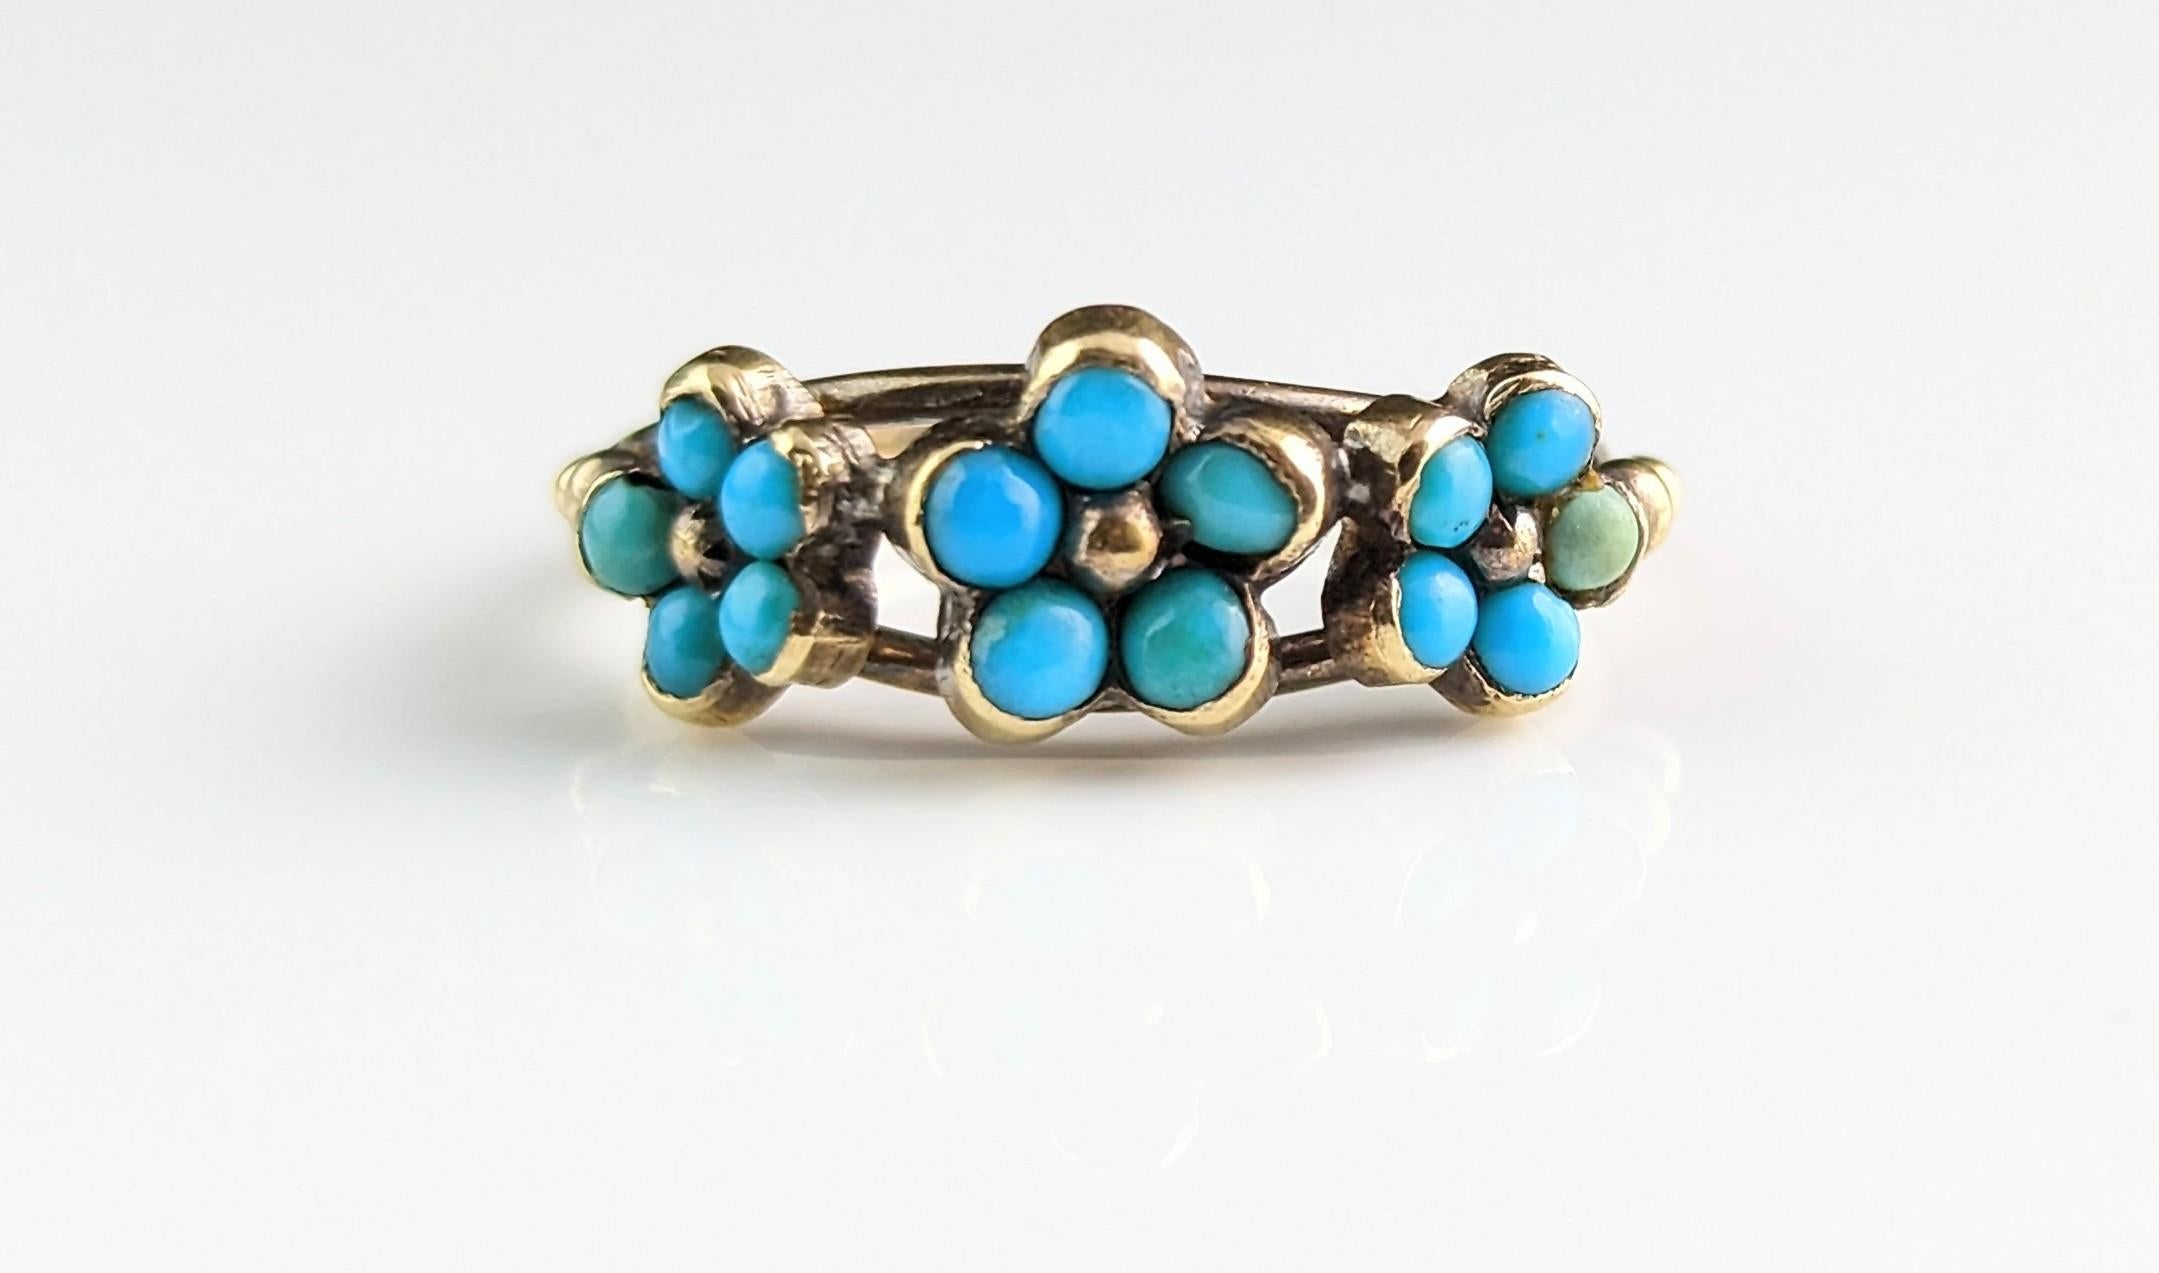 Antique Georgian Triple Flower Ring, Forget Me Not, 18k Gold and Turquoise 6